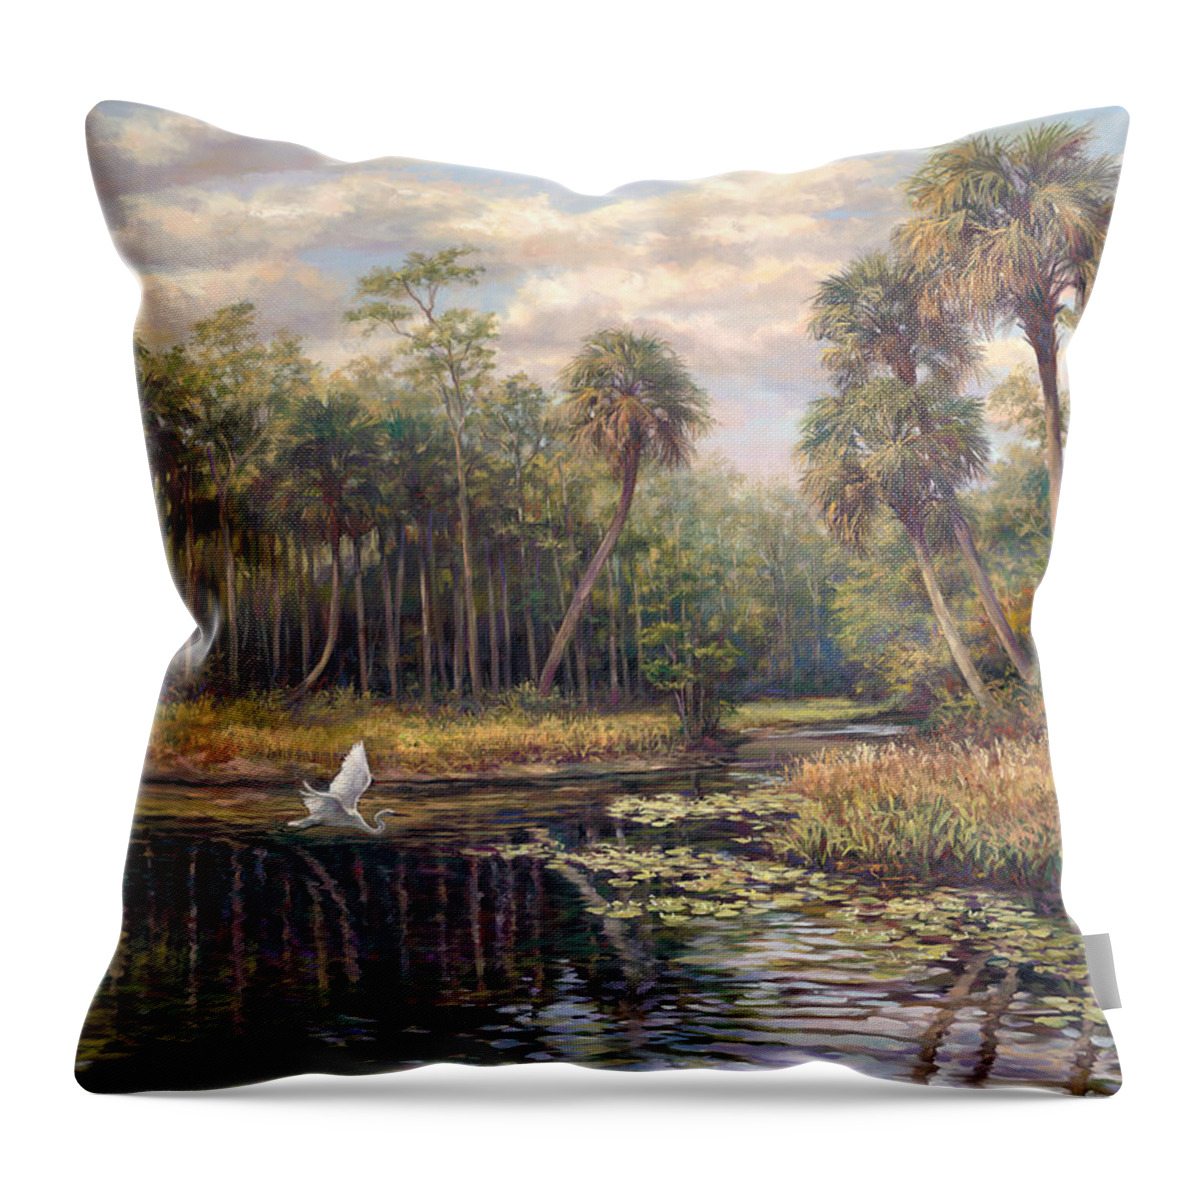 Romantic Landscape Throw Pillow featuring the painting River Bend park Swan II by Laurie Snow Hein